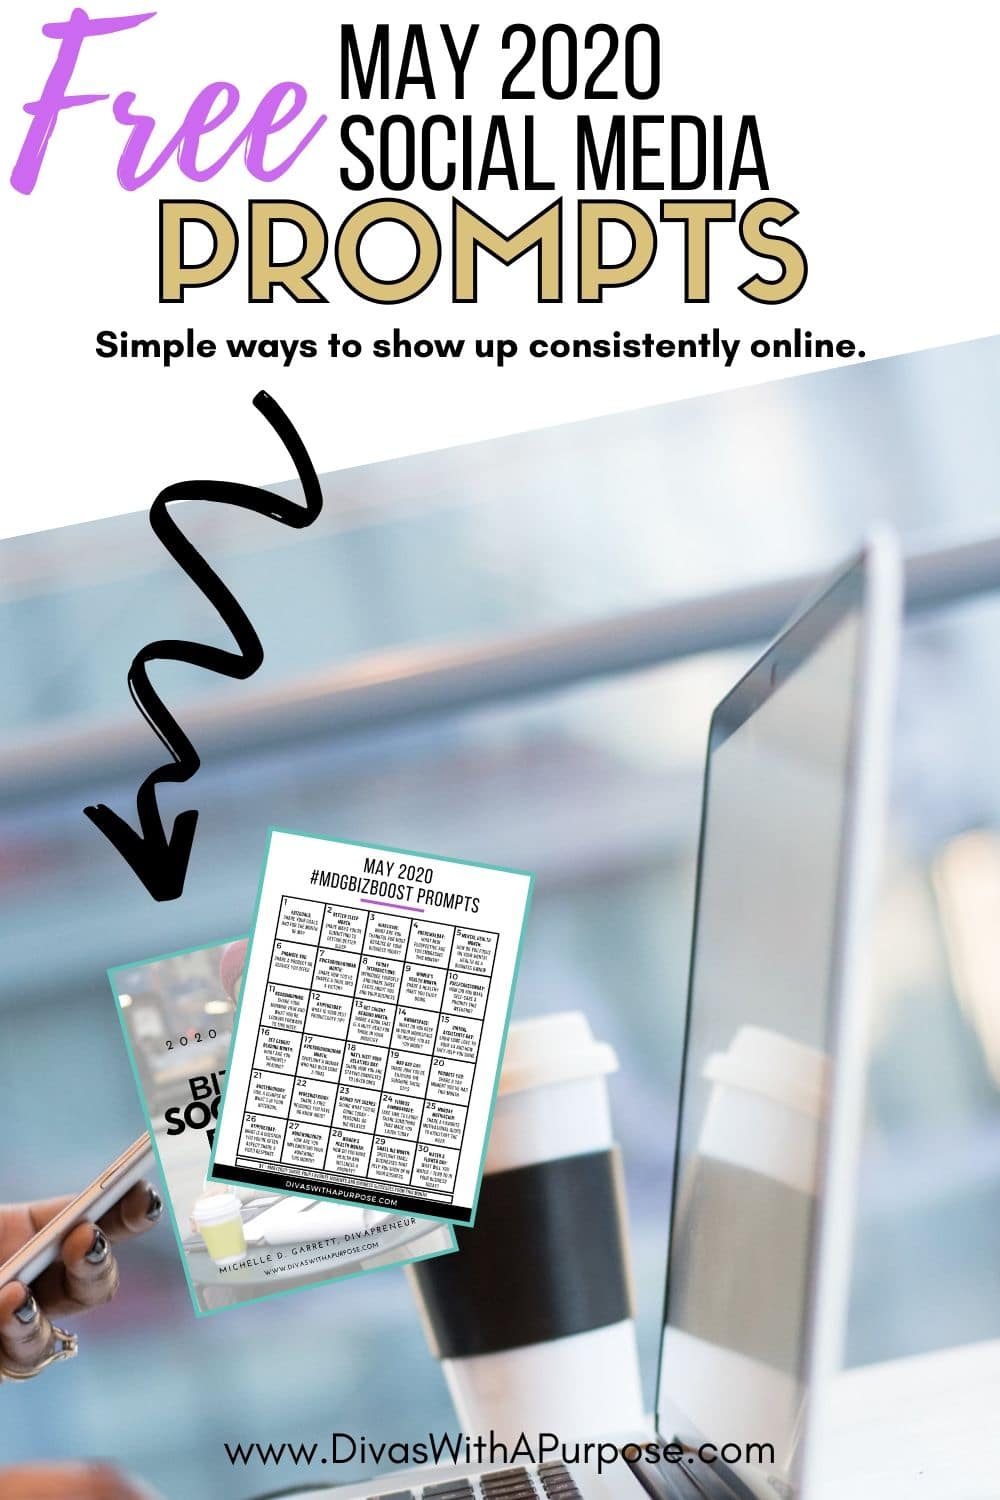 Free May social media prompts - simple ways to show up consistently online all month long